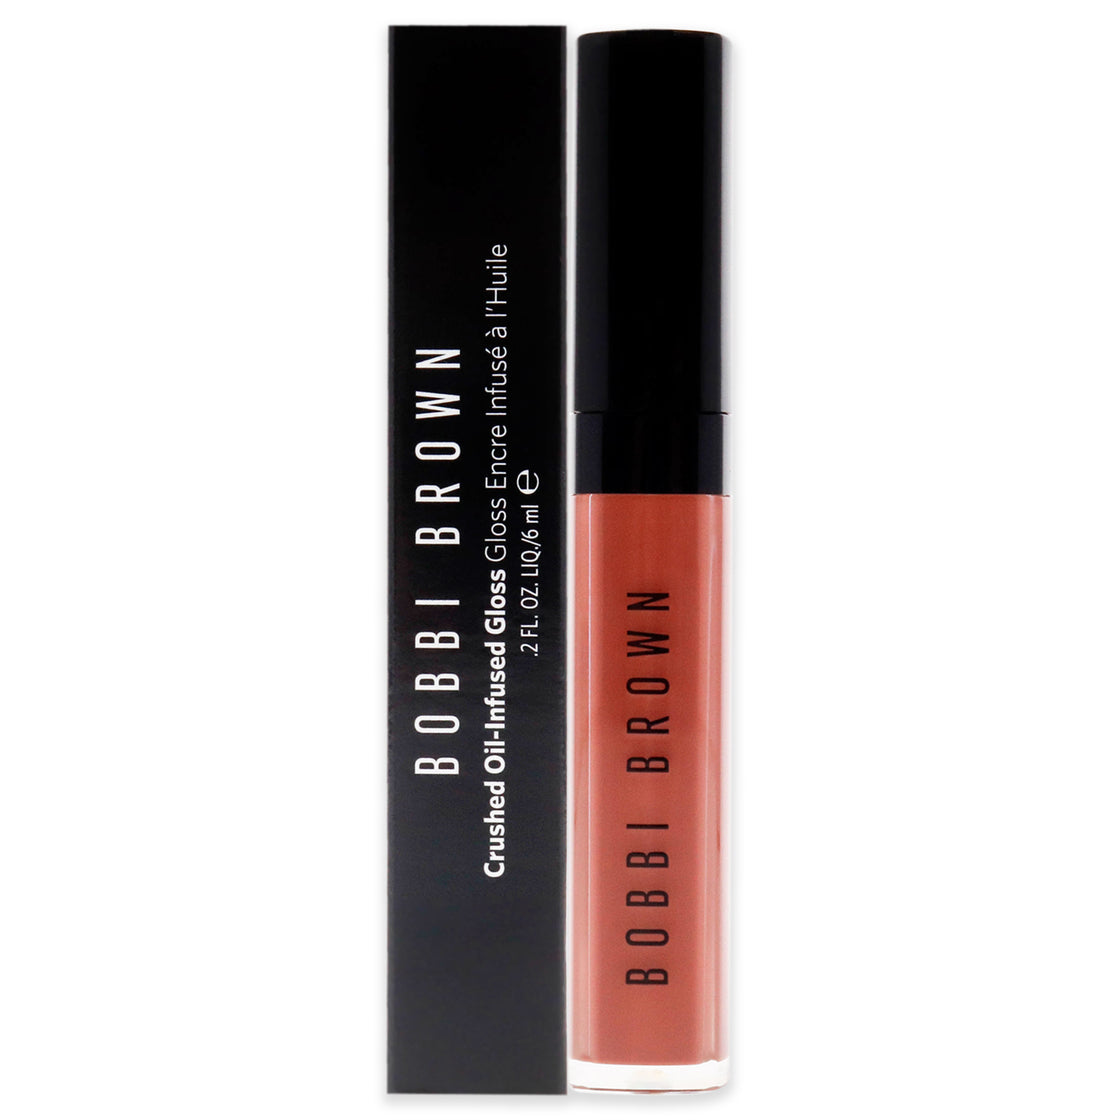 Crushed Oil-Infused Gloss - Free Spirit by Bobbi Brown for Women - 0.2 oz Lip Gloss